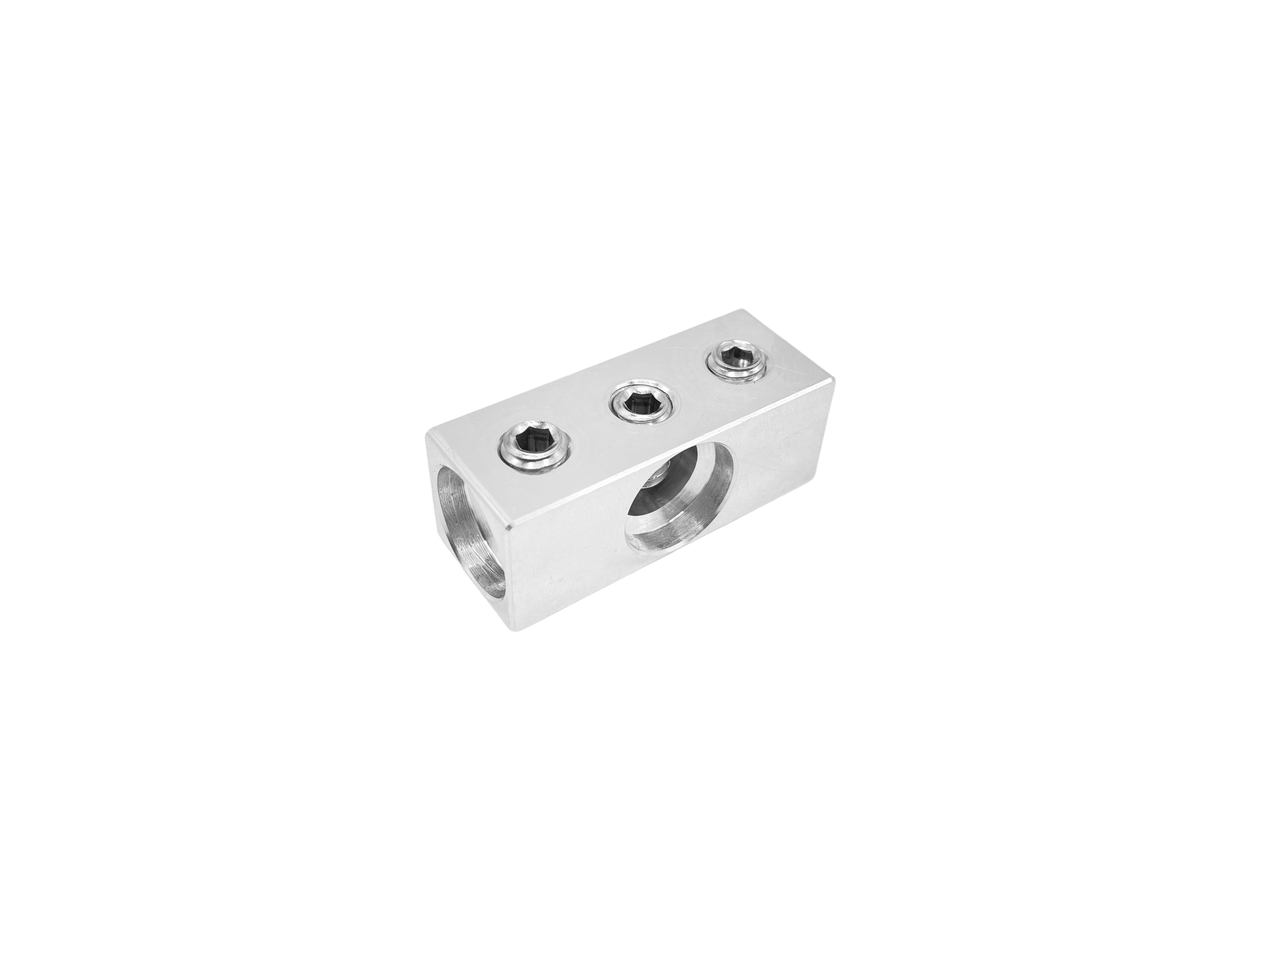 SMD Triple LRC Cable Adapter Block - 3 x 8AWG to 3 x 1/0AWG (1 Adaptor)